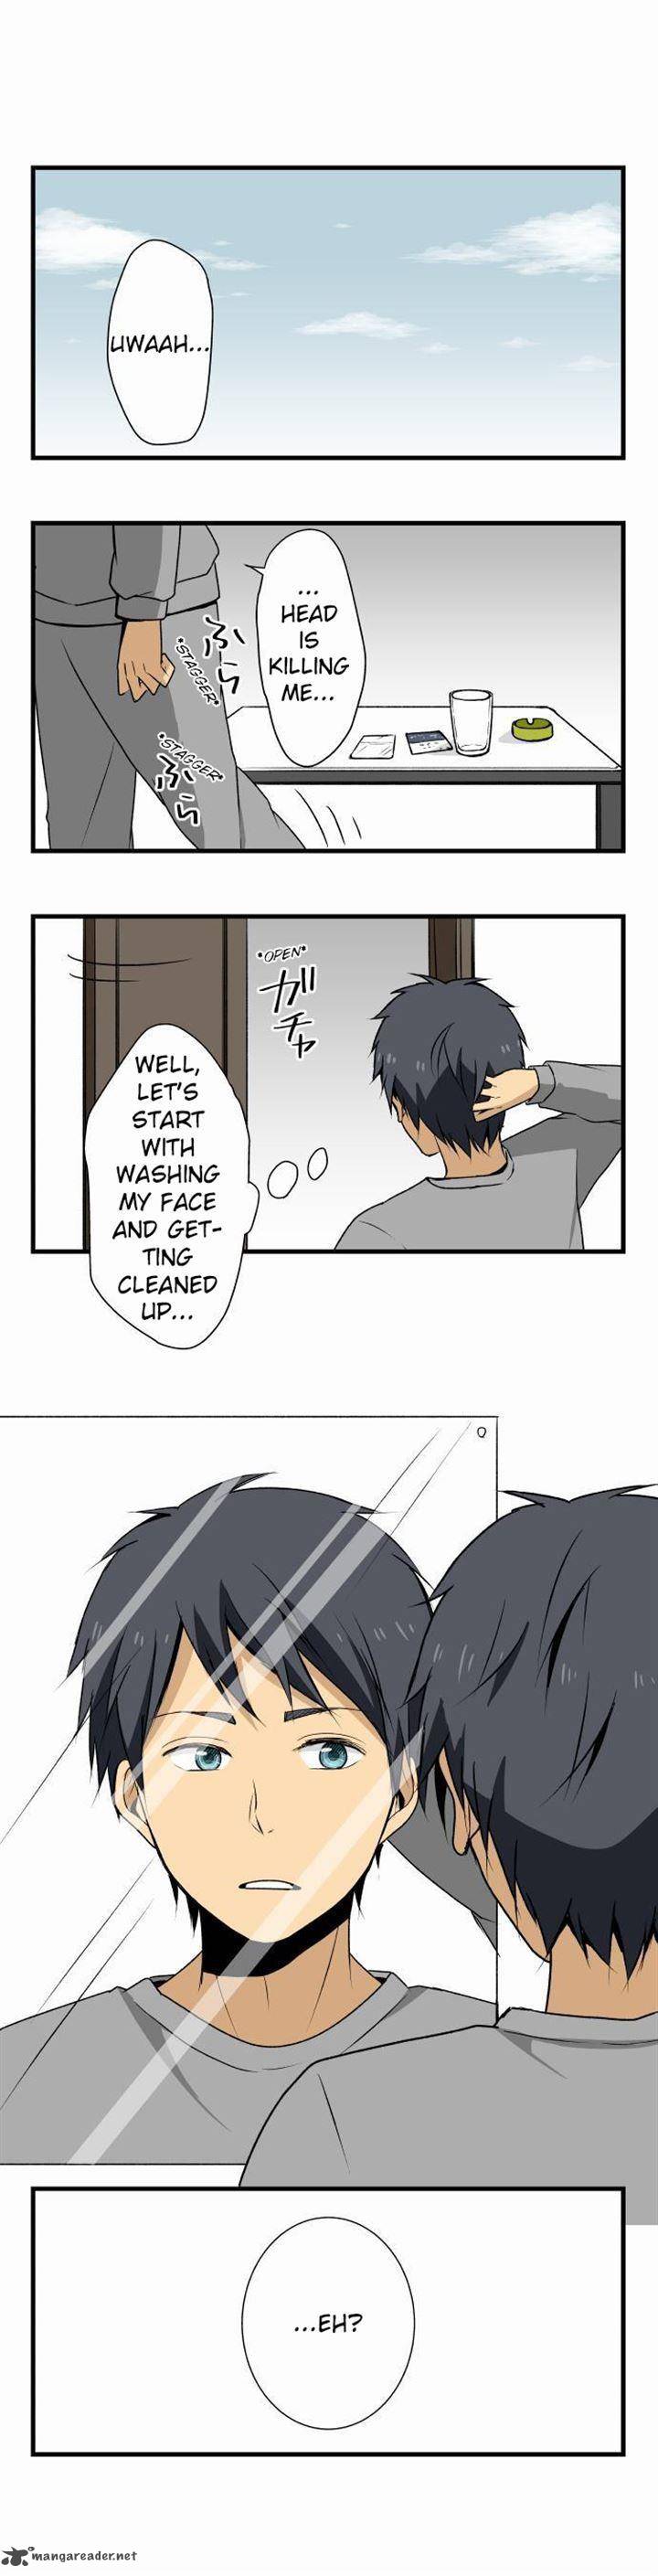 Relife Chapter 4 Page 1